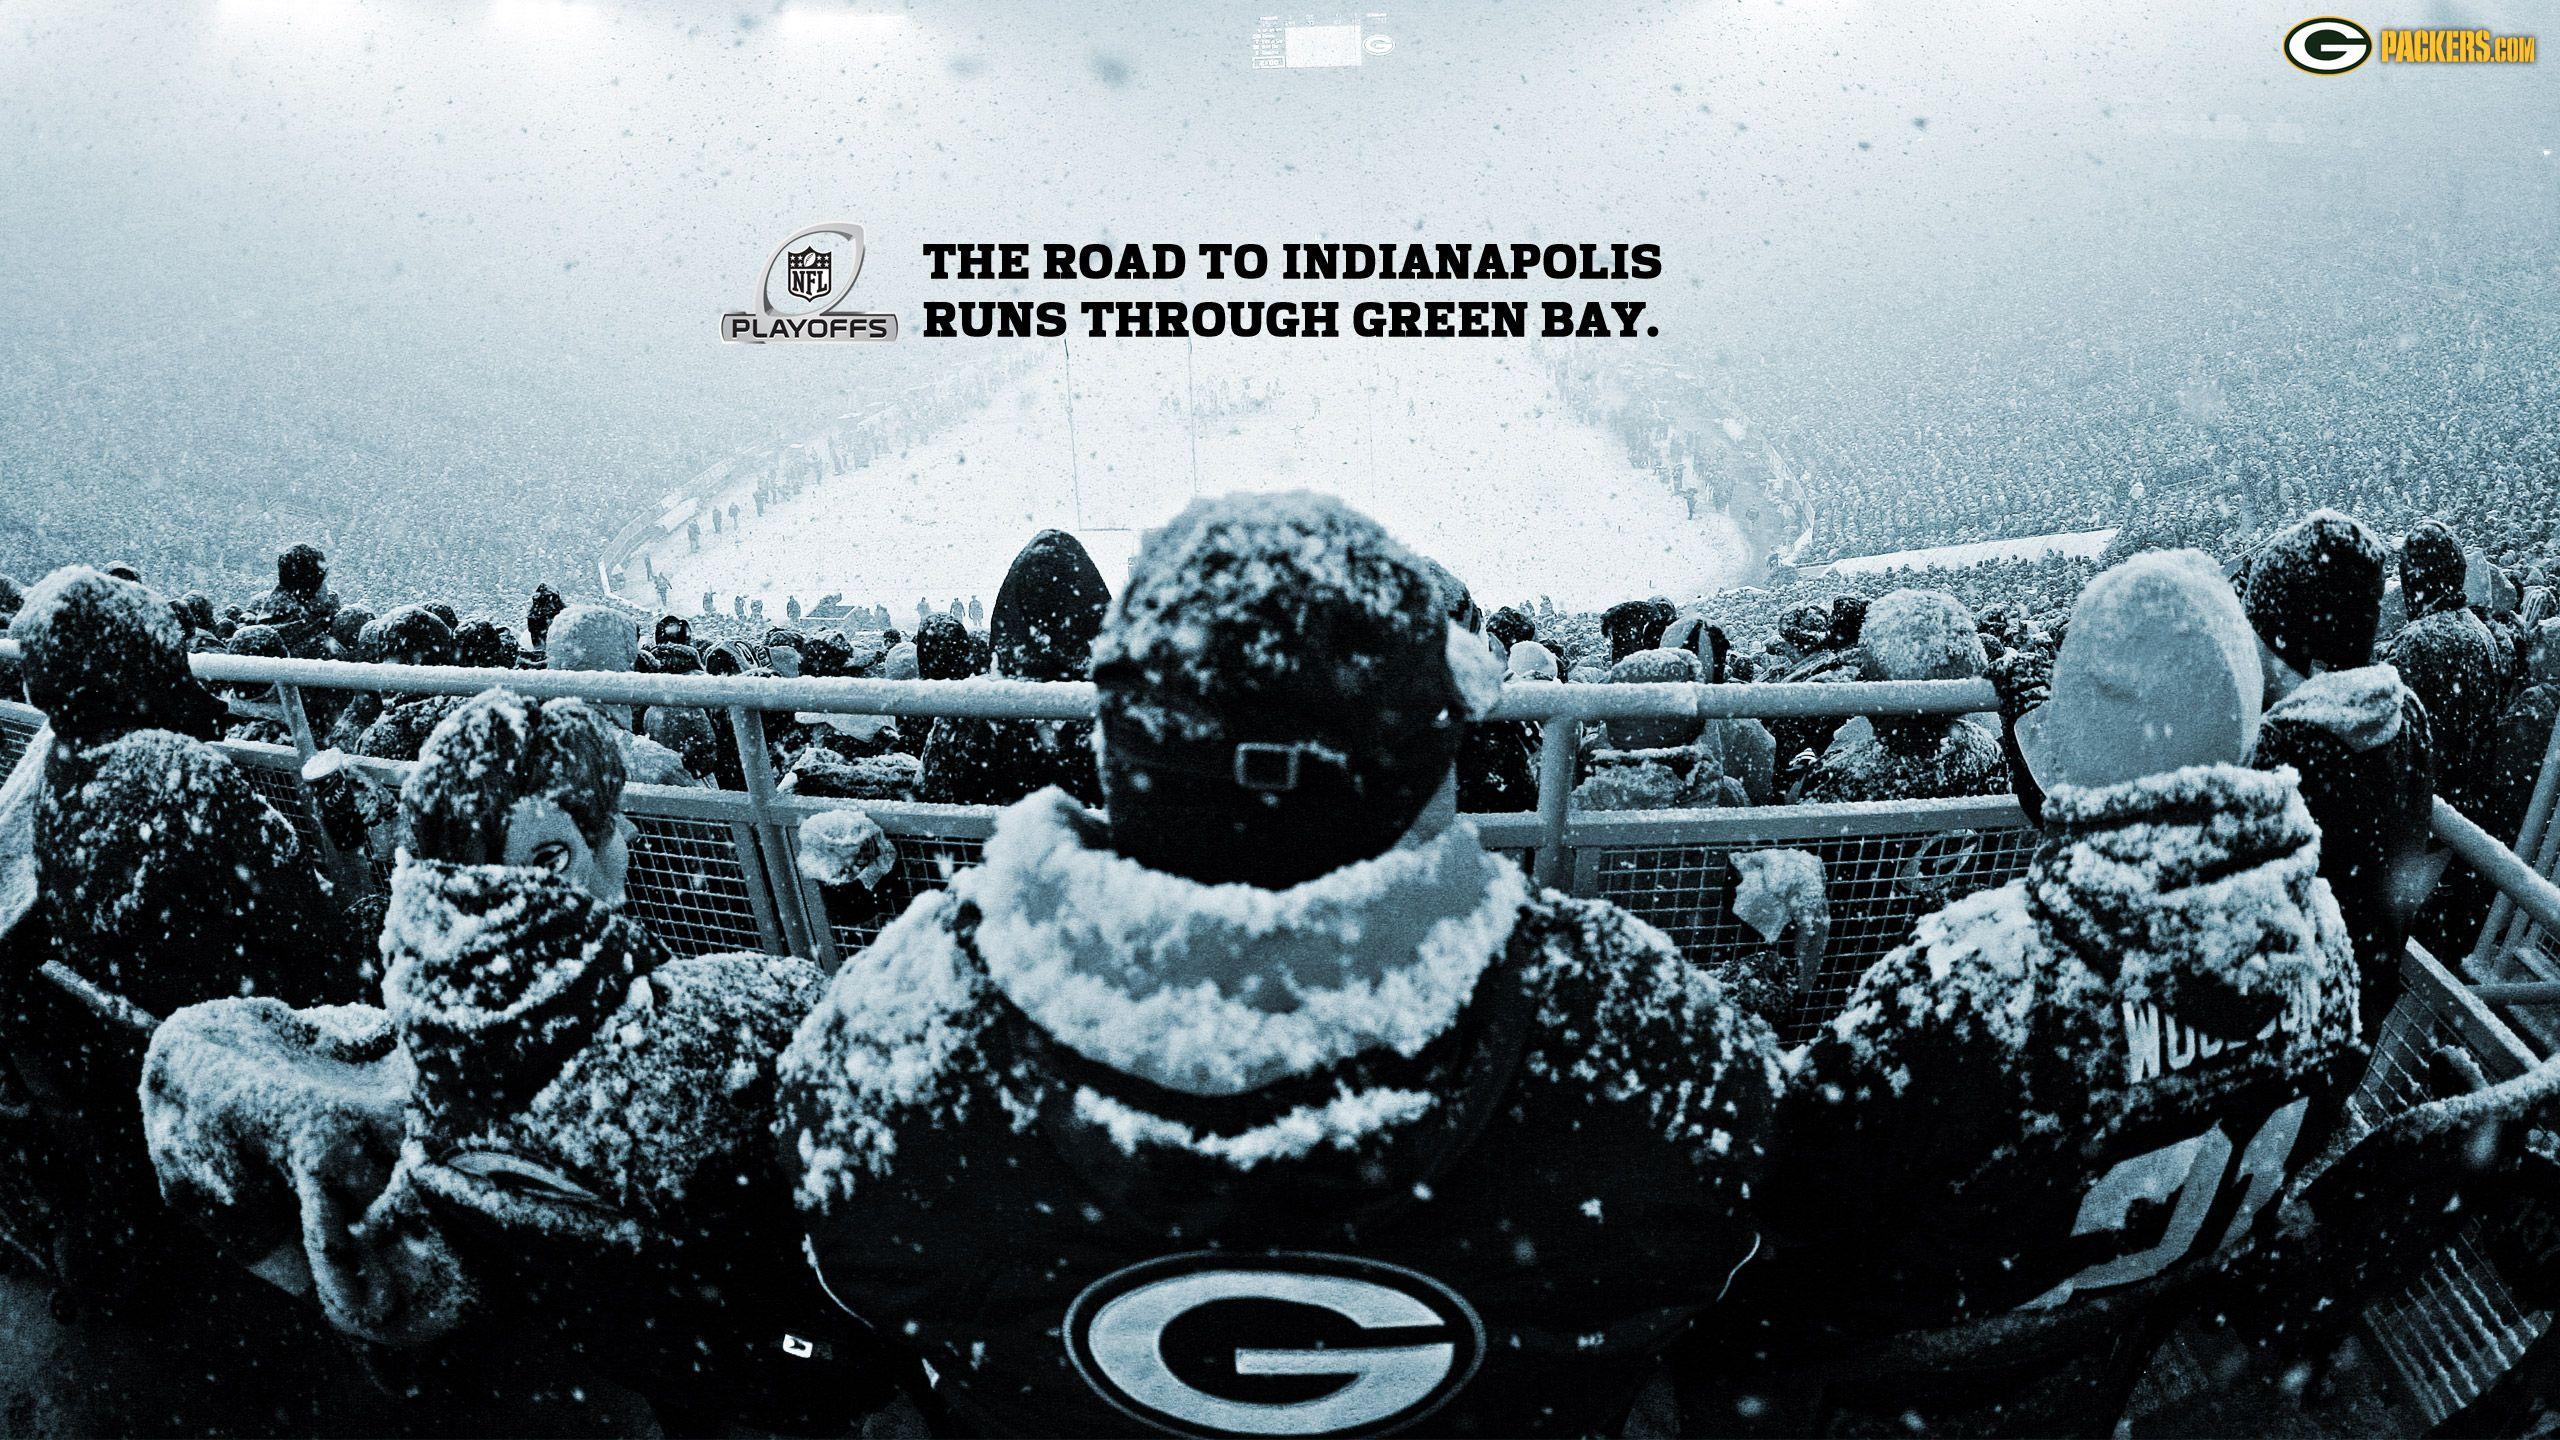 Packers.com. Wallpaper: 2011 Miscellaneous